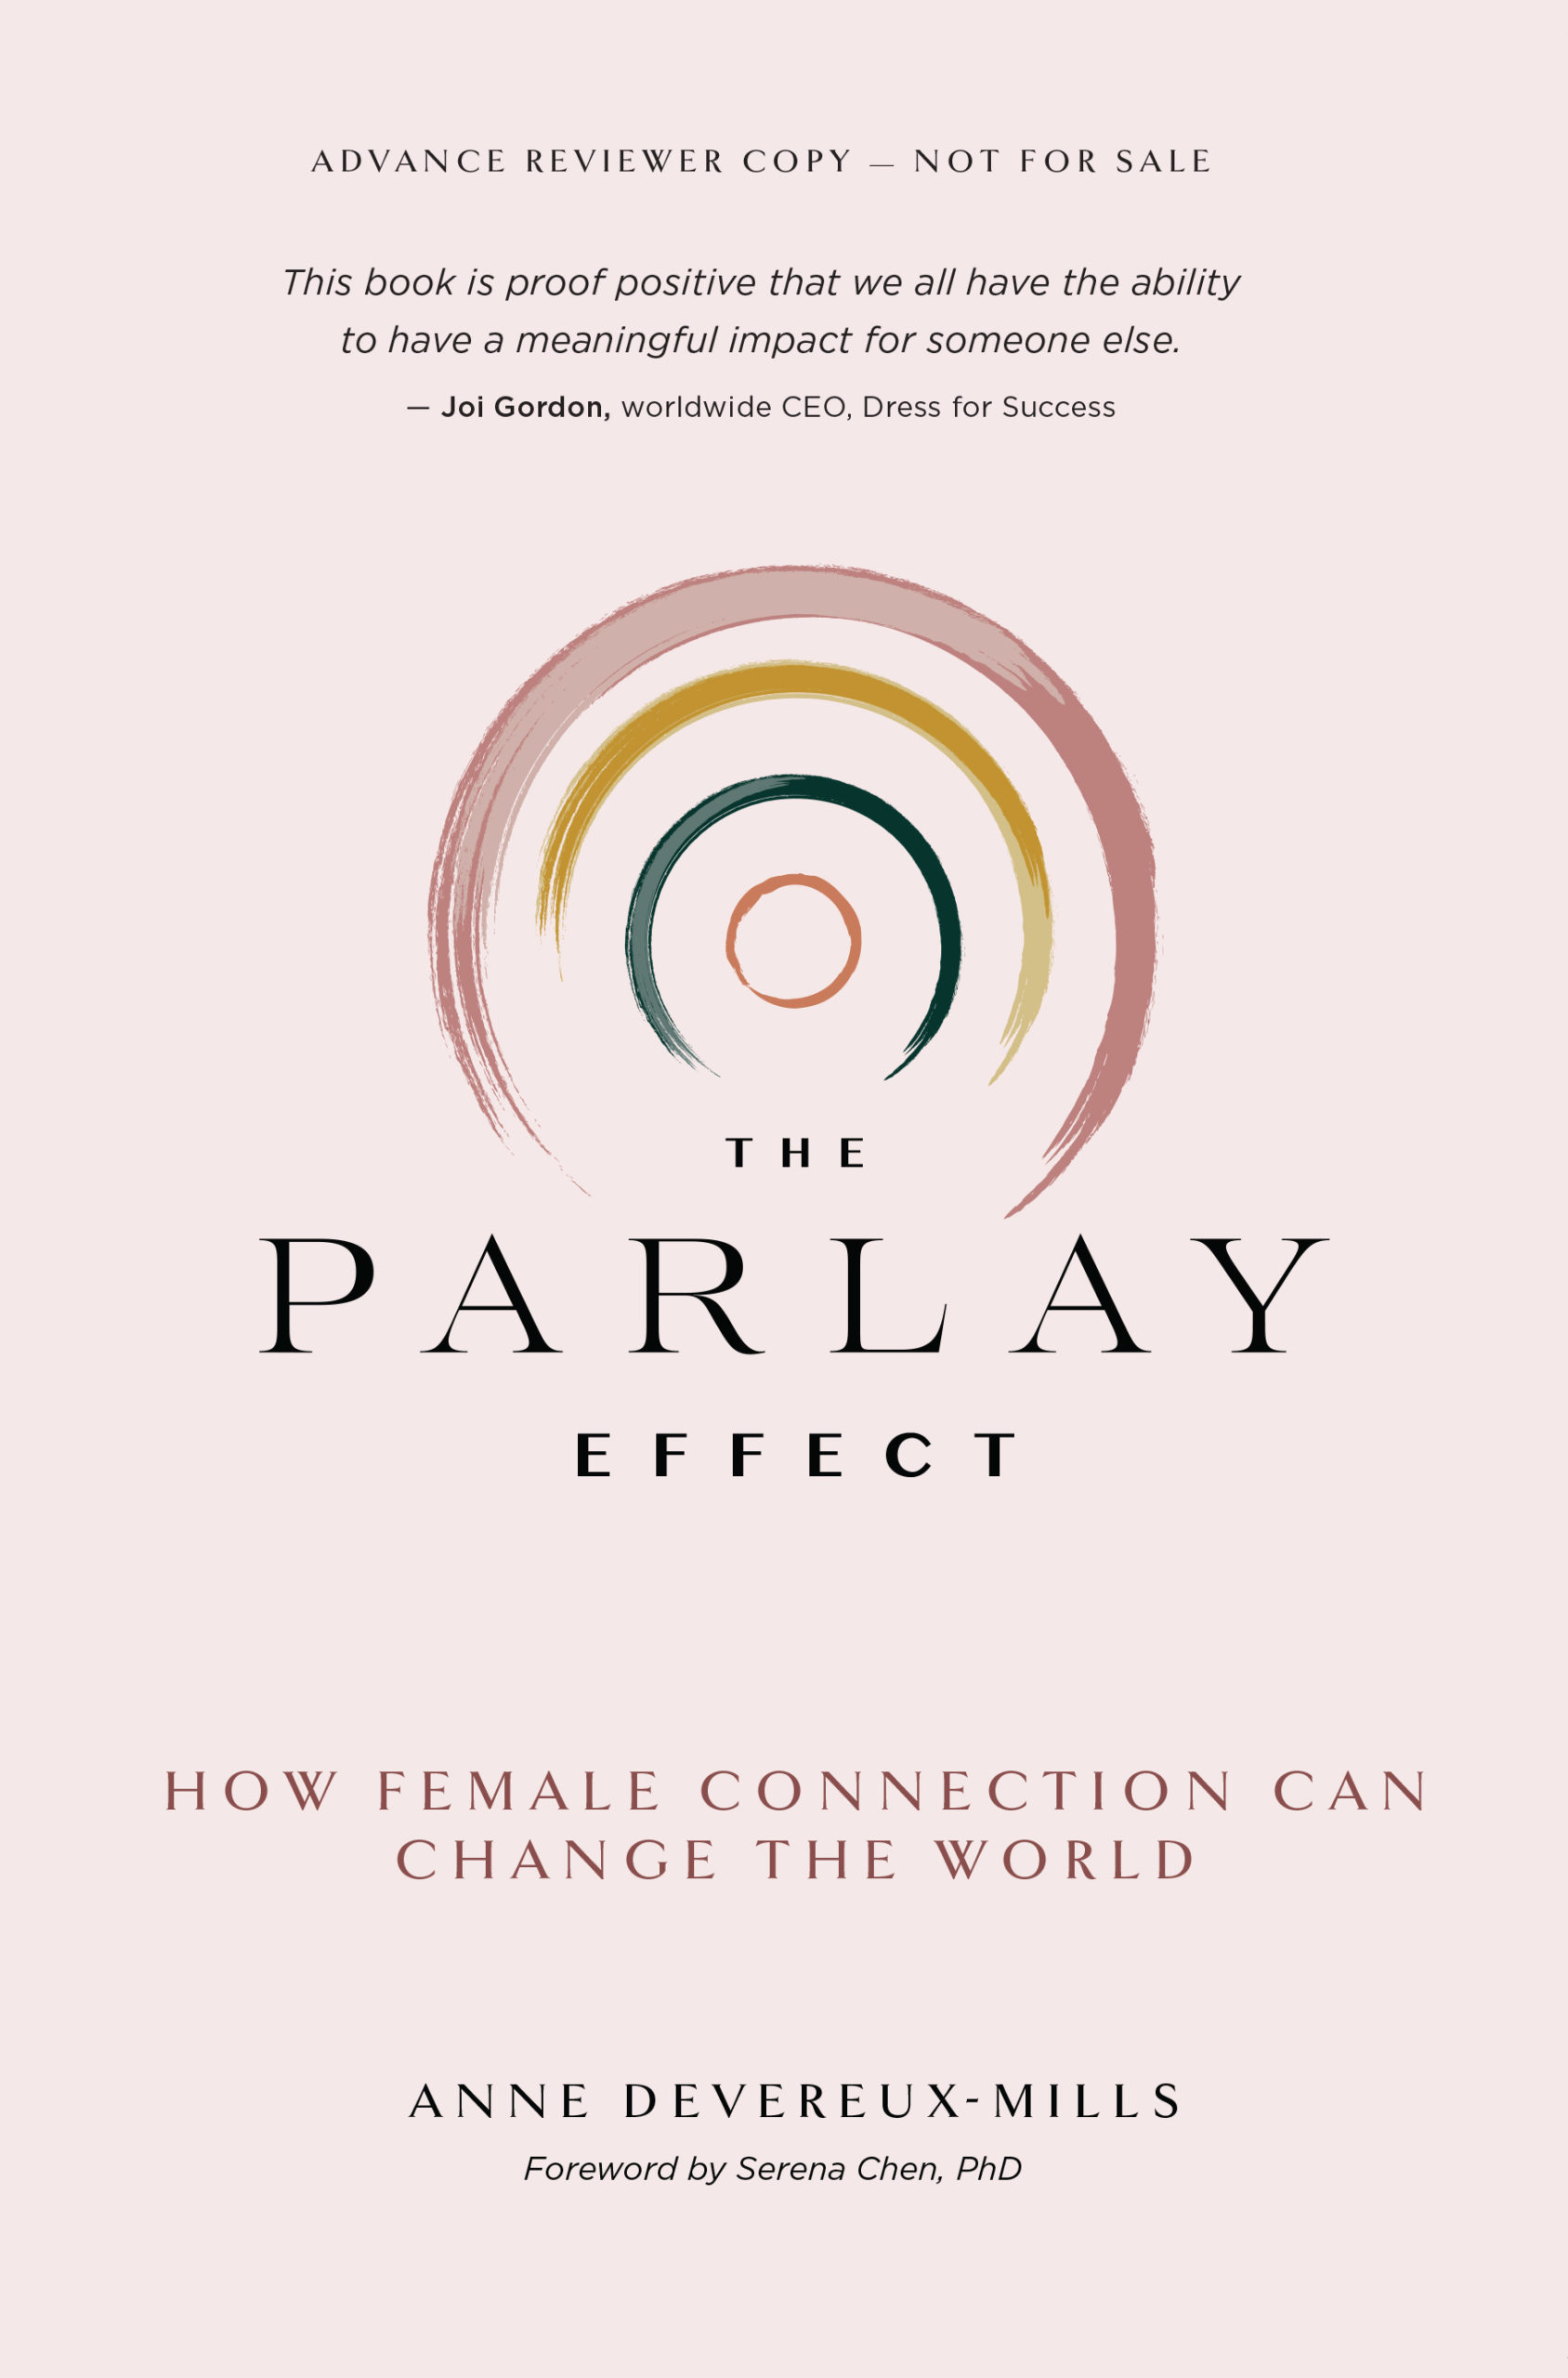 The Parlay Effect: How Female Connection Can Change The World by Anne Devereux-Mills